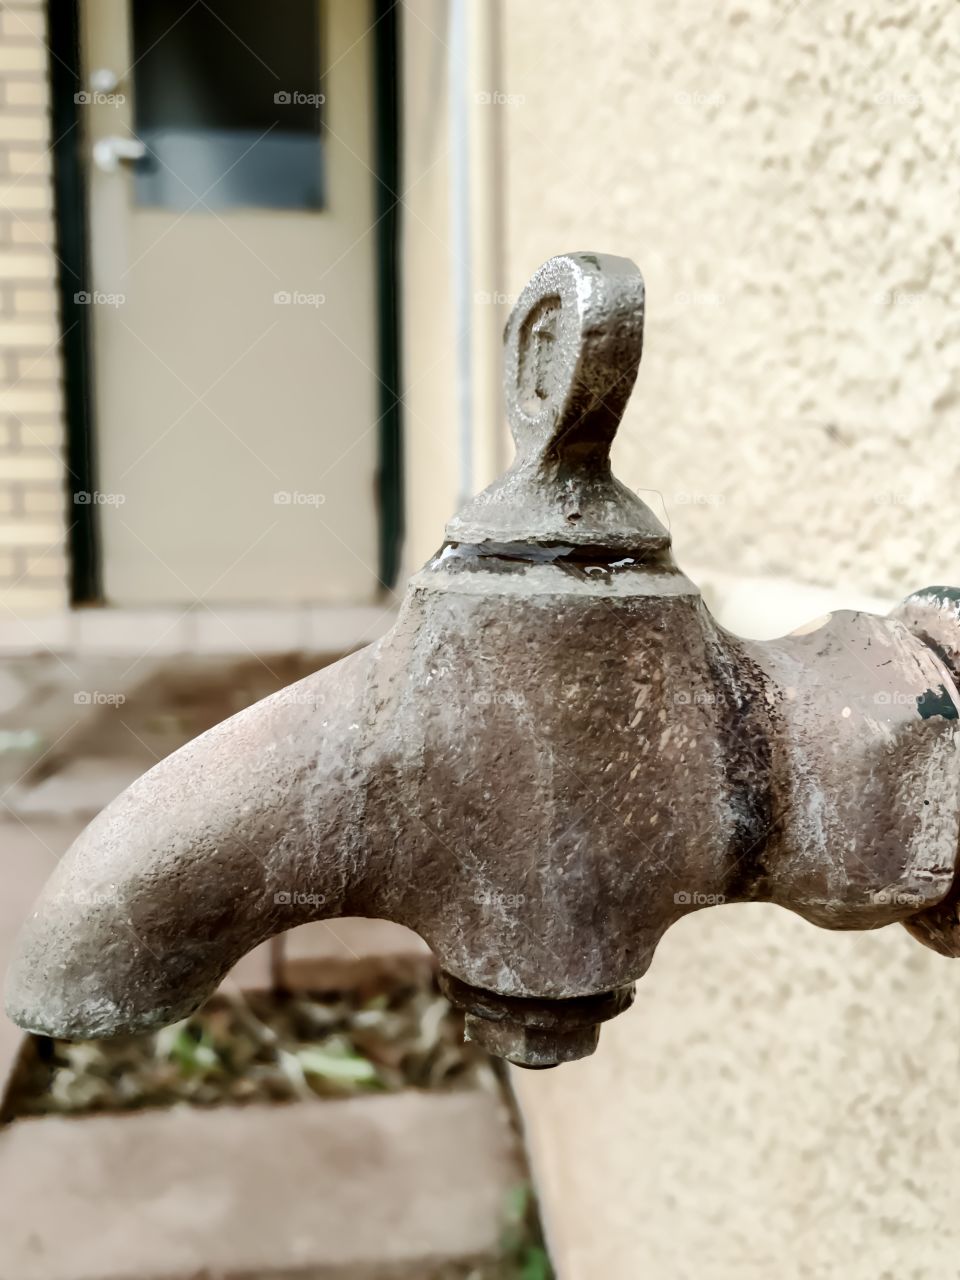 Antique old retro vintage iron outdoor water tap faucet spigot pipe, water flowing turned on